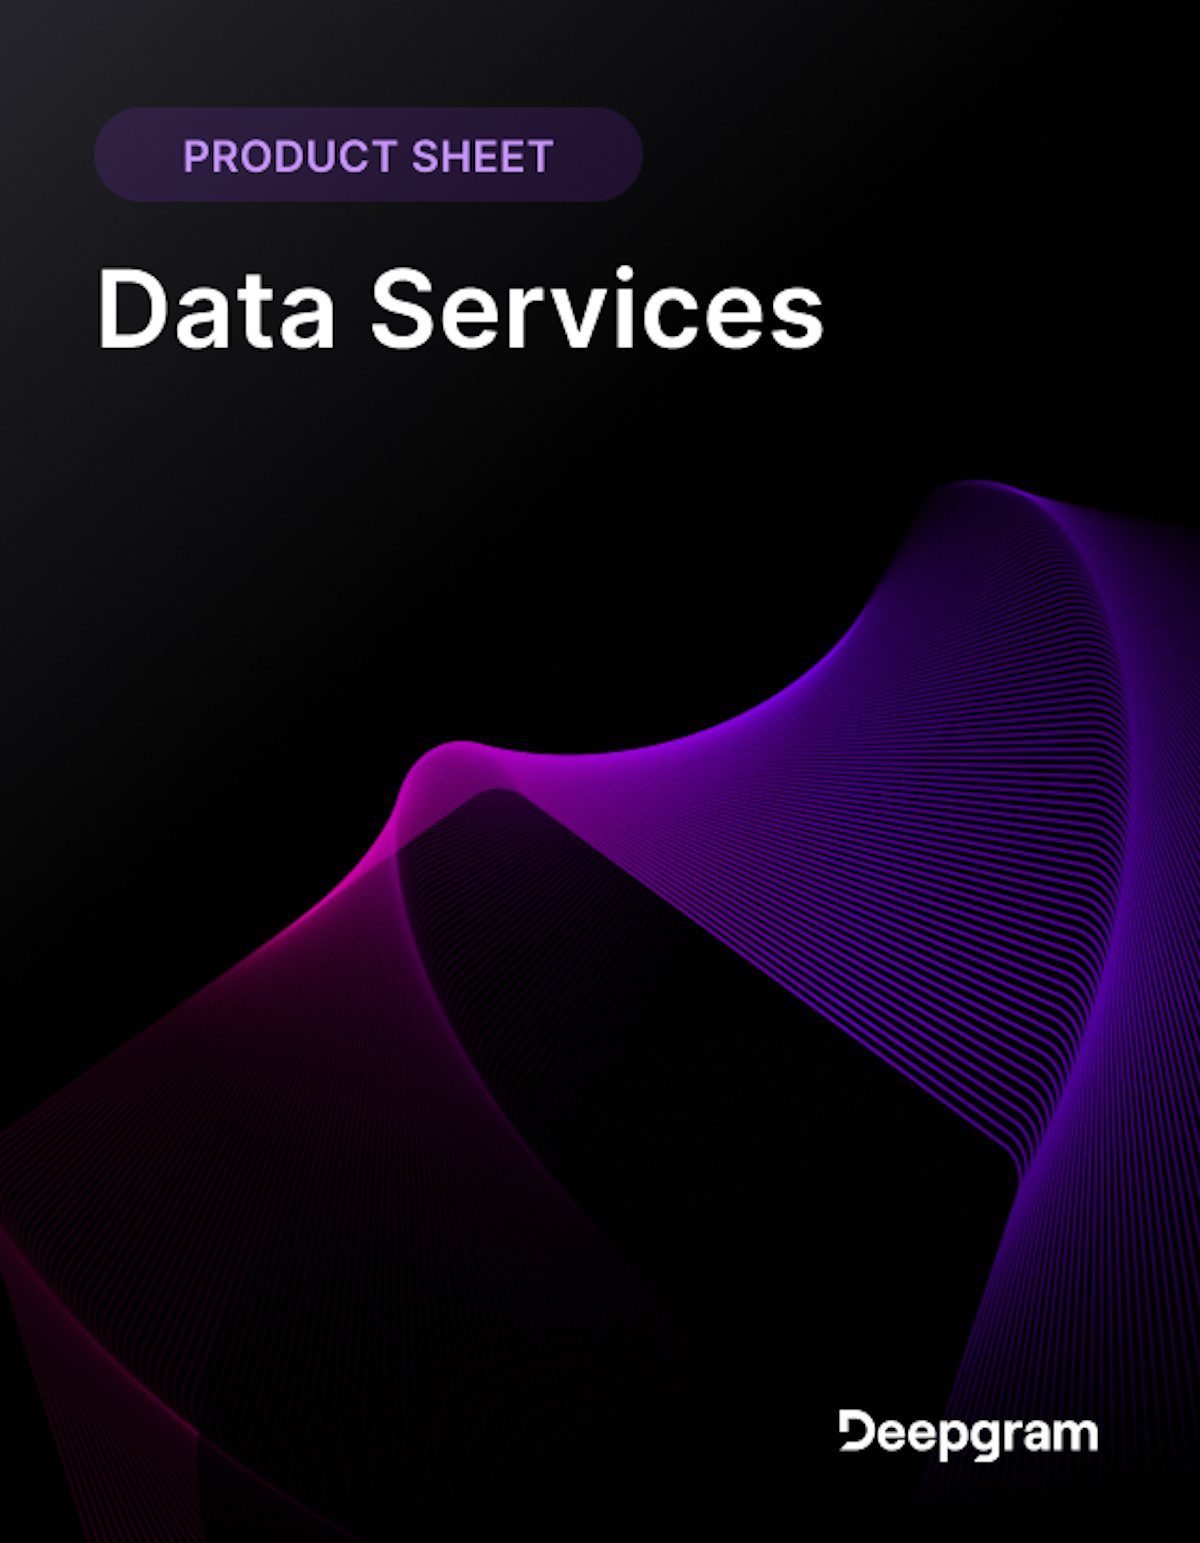 Data Services